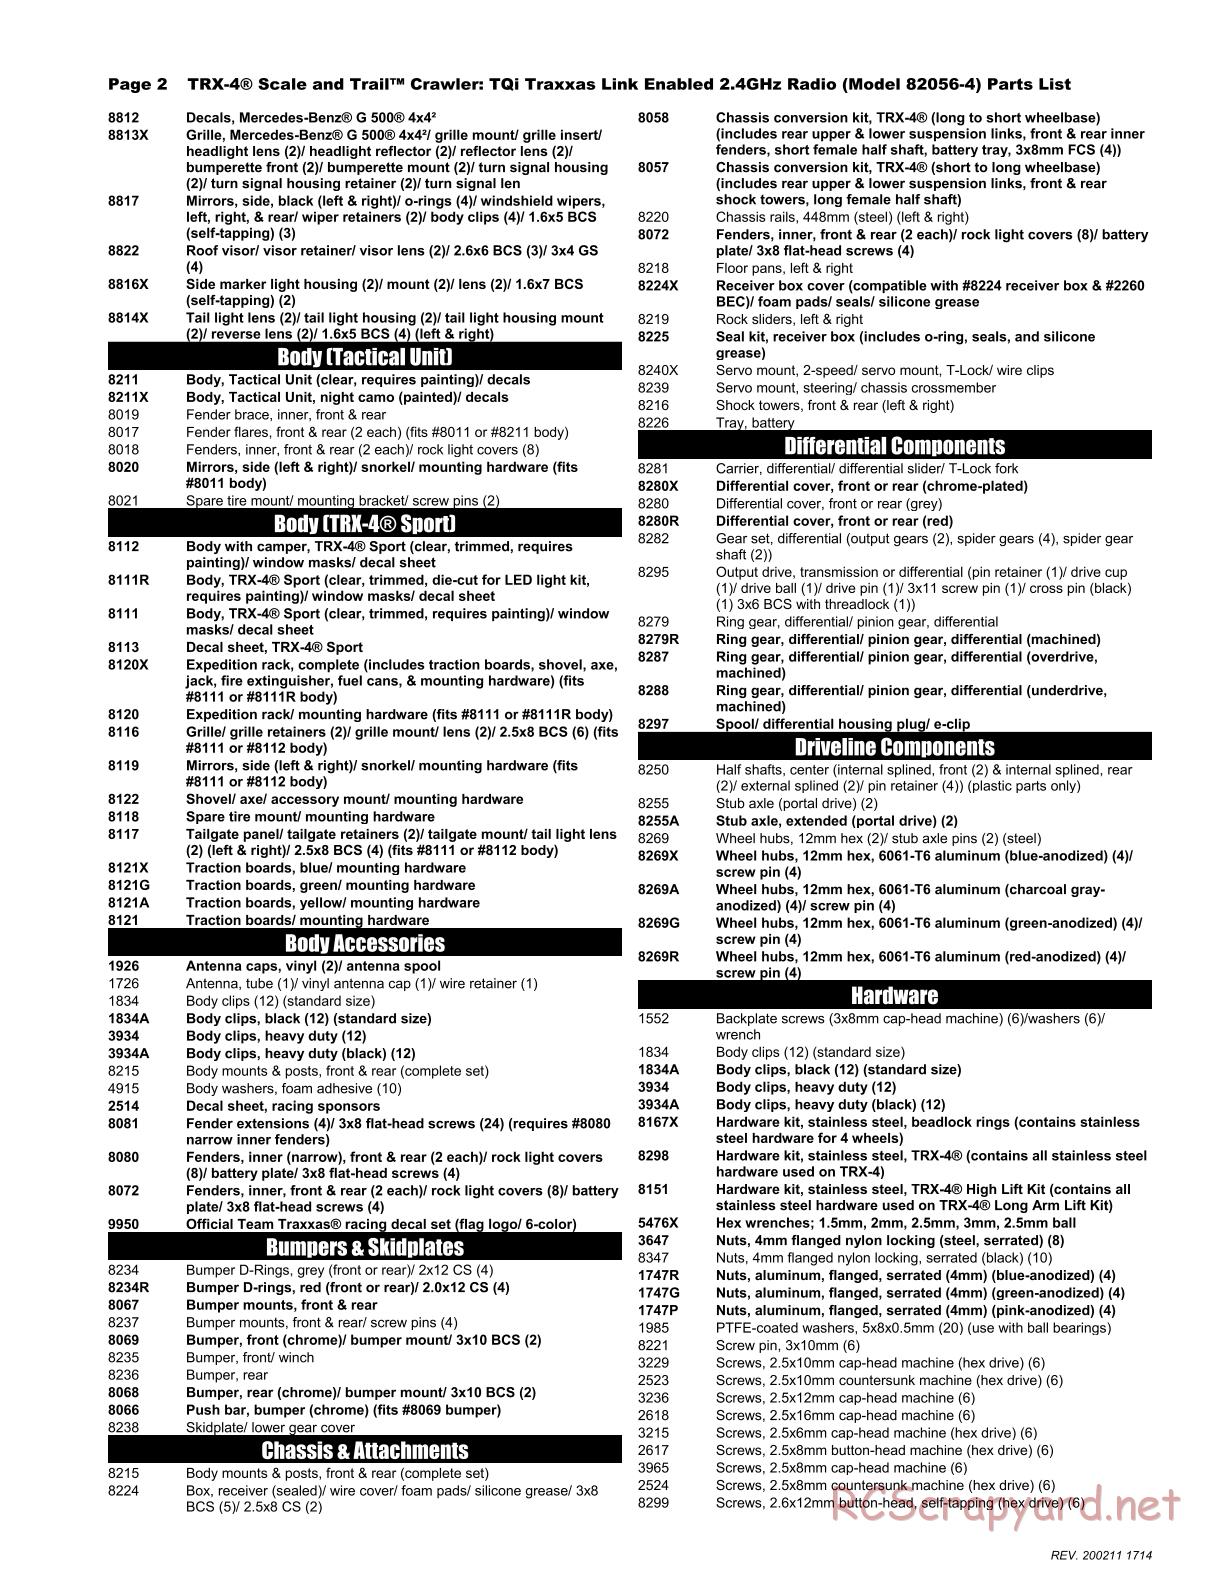 Traxxas - TRX-4 Land Rover Defender - Parts List - Page 2